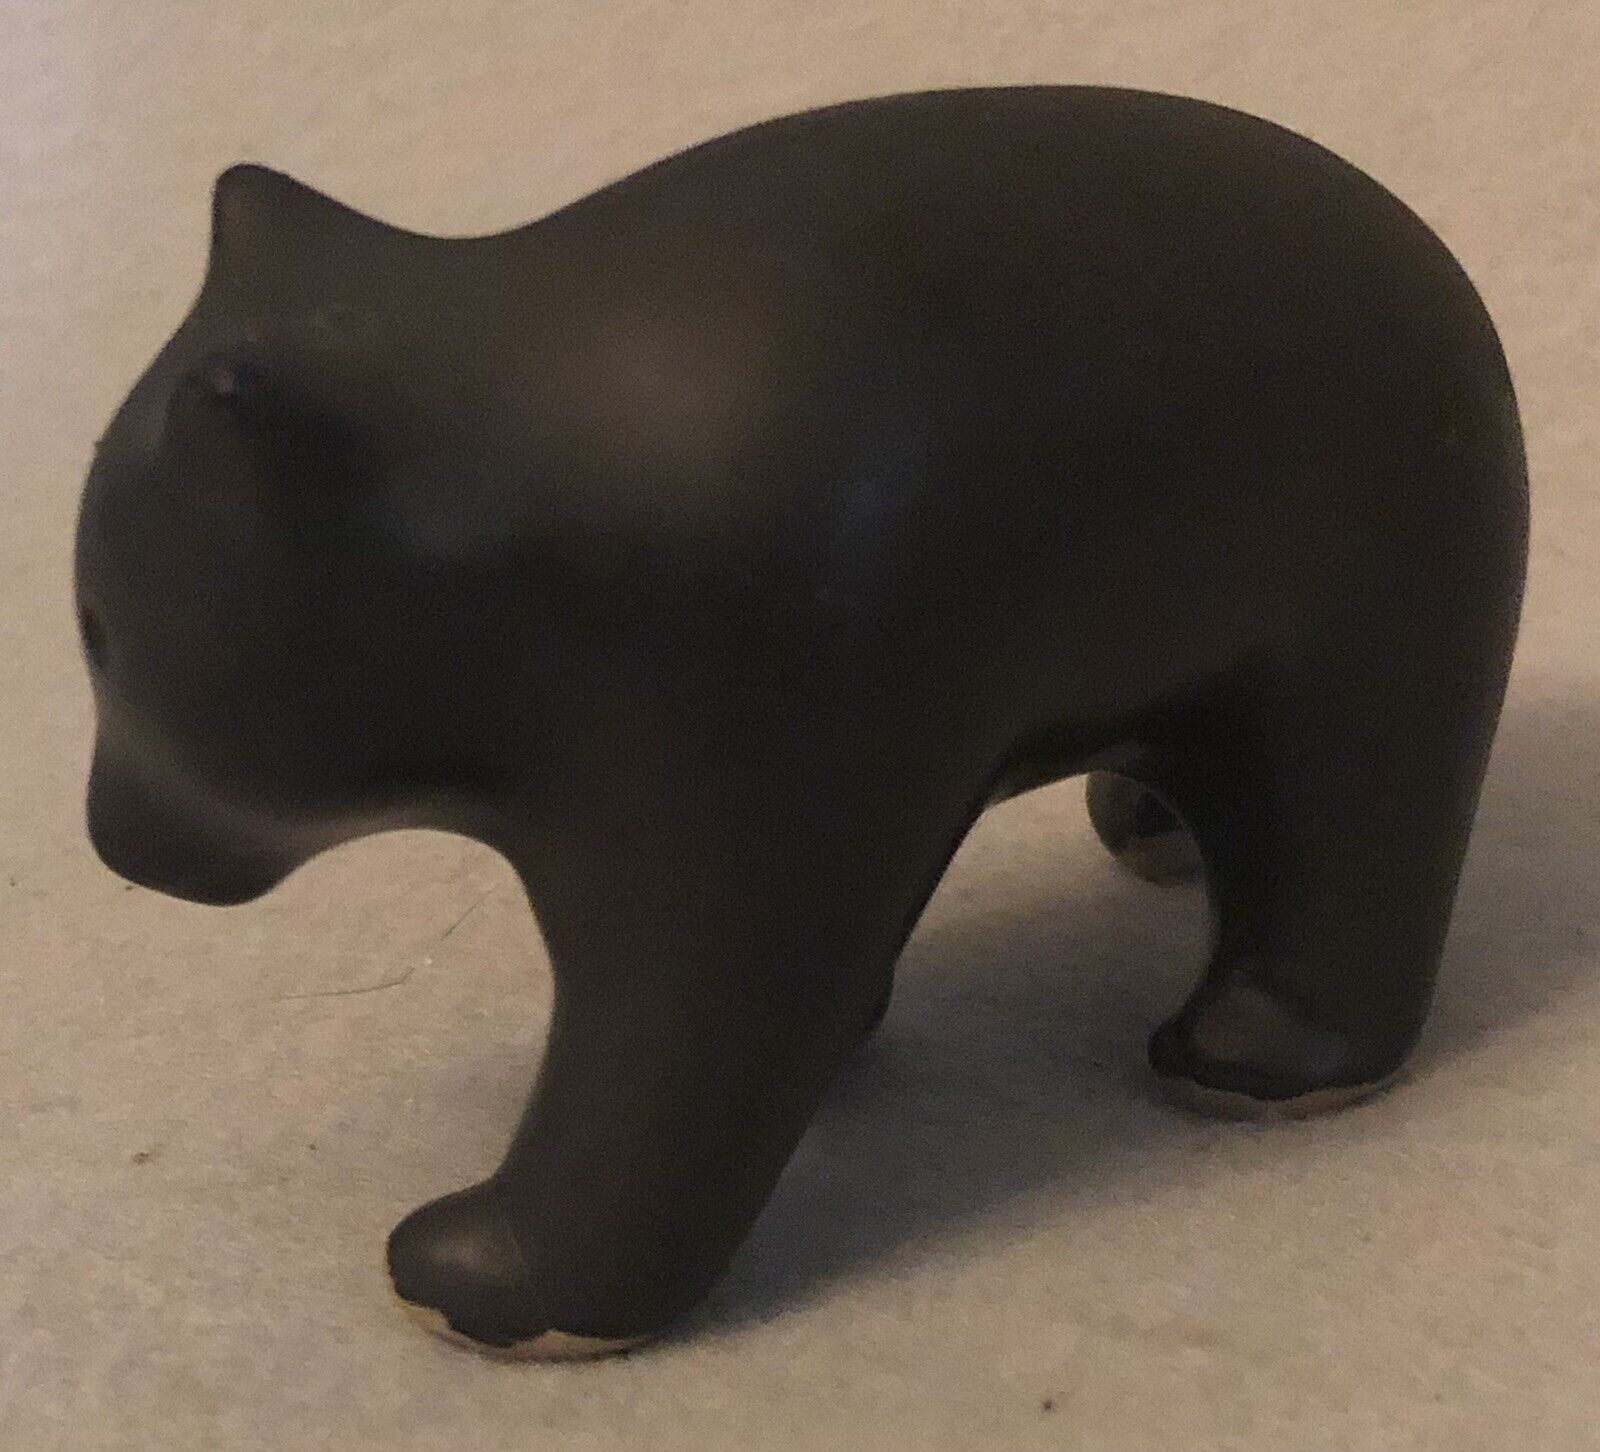 Antique Native American Bear Figurine 4.5” x 3” Inuit, Possibly